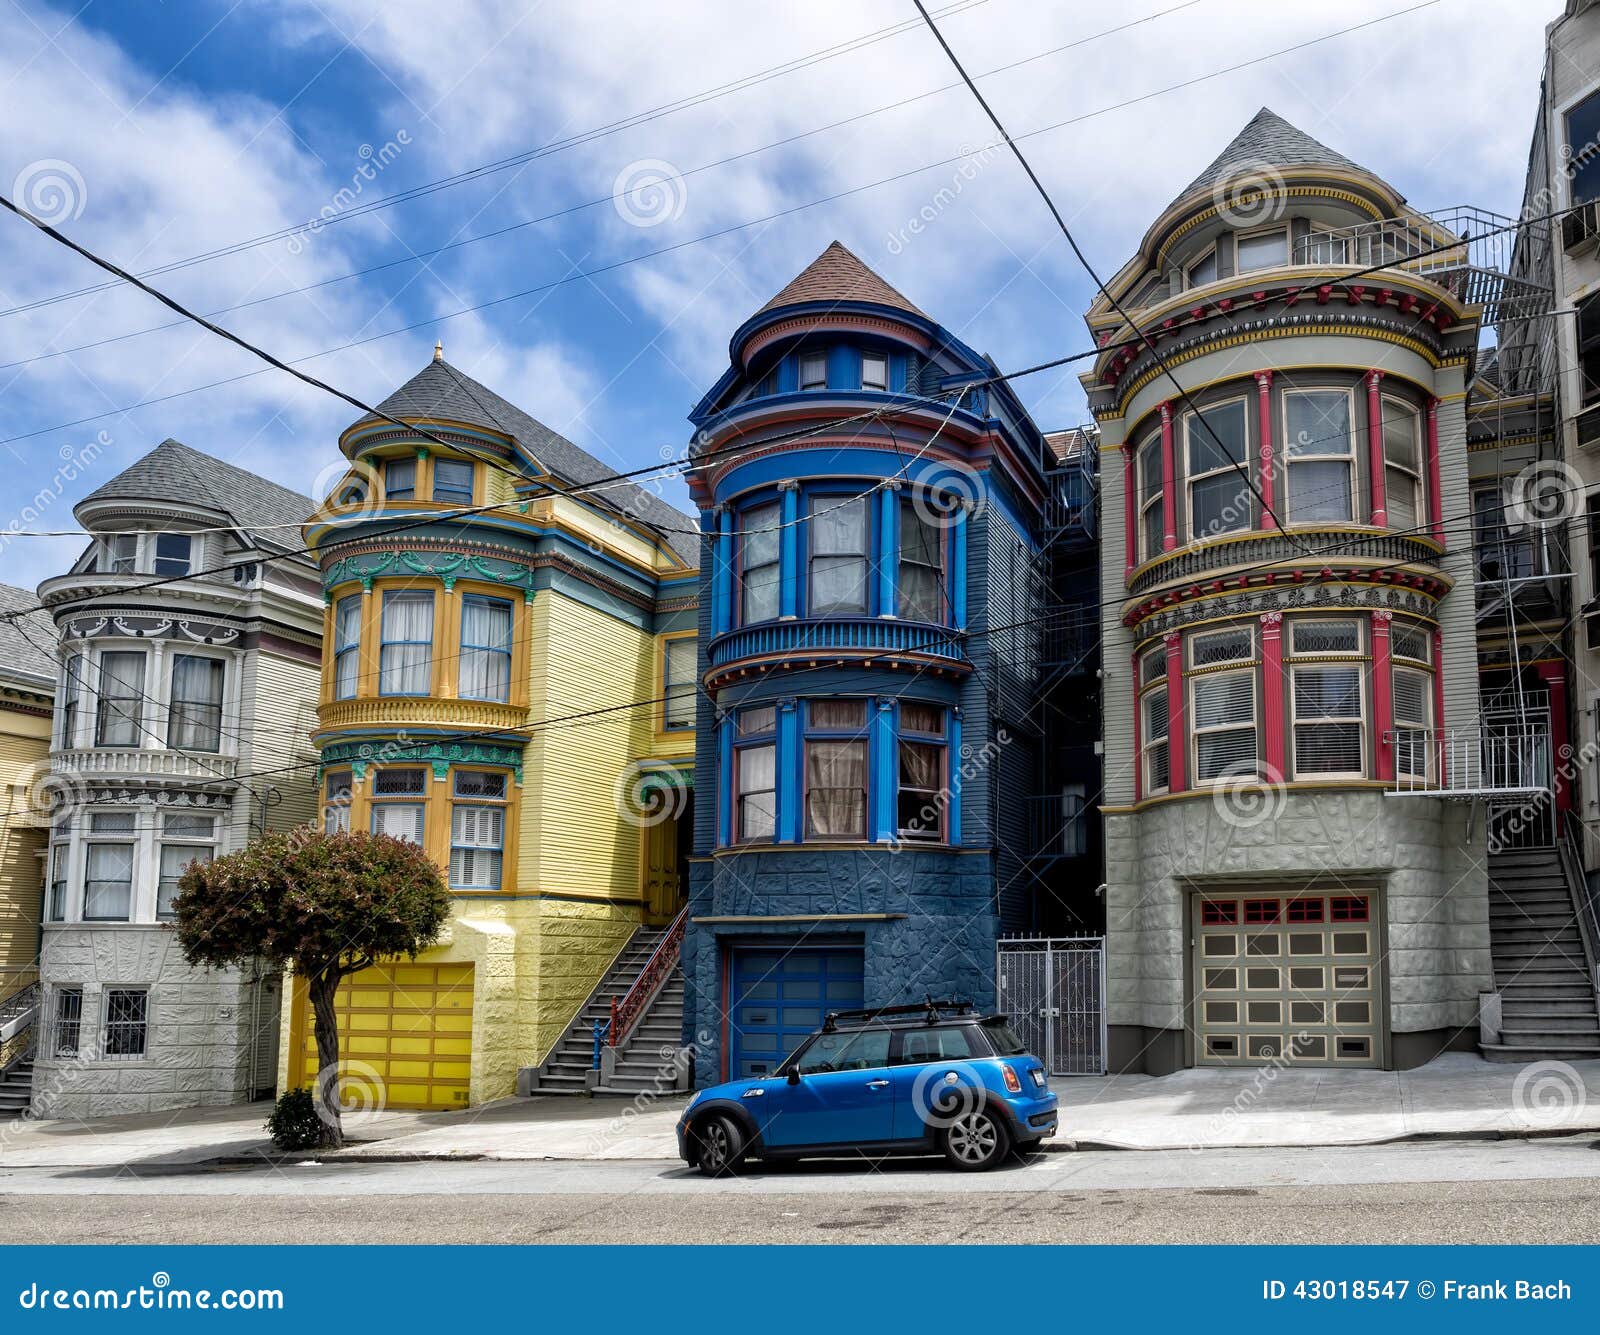 Painted Ladies Victorian Houses In San Francisco Stock Photo Image